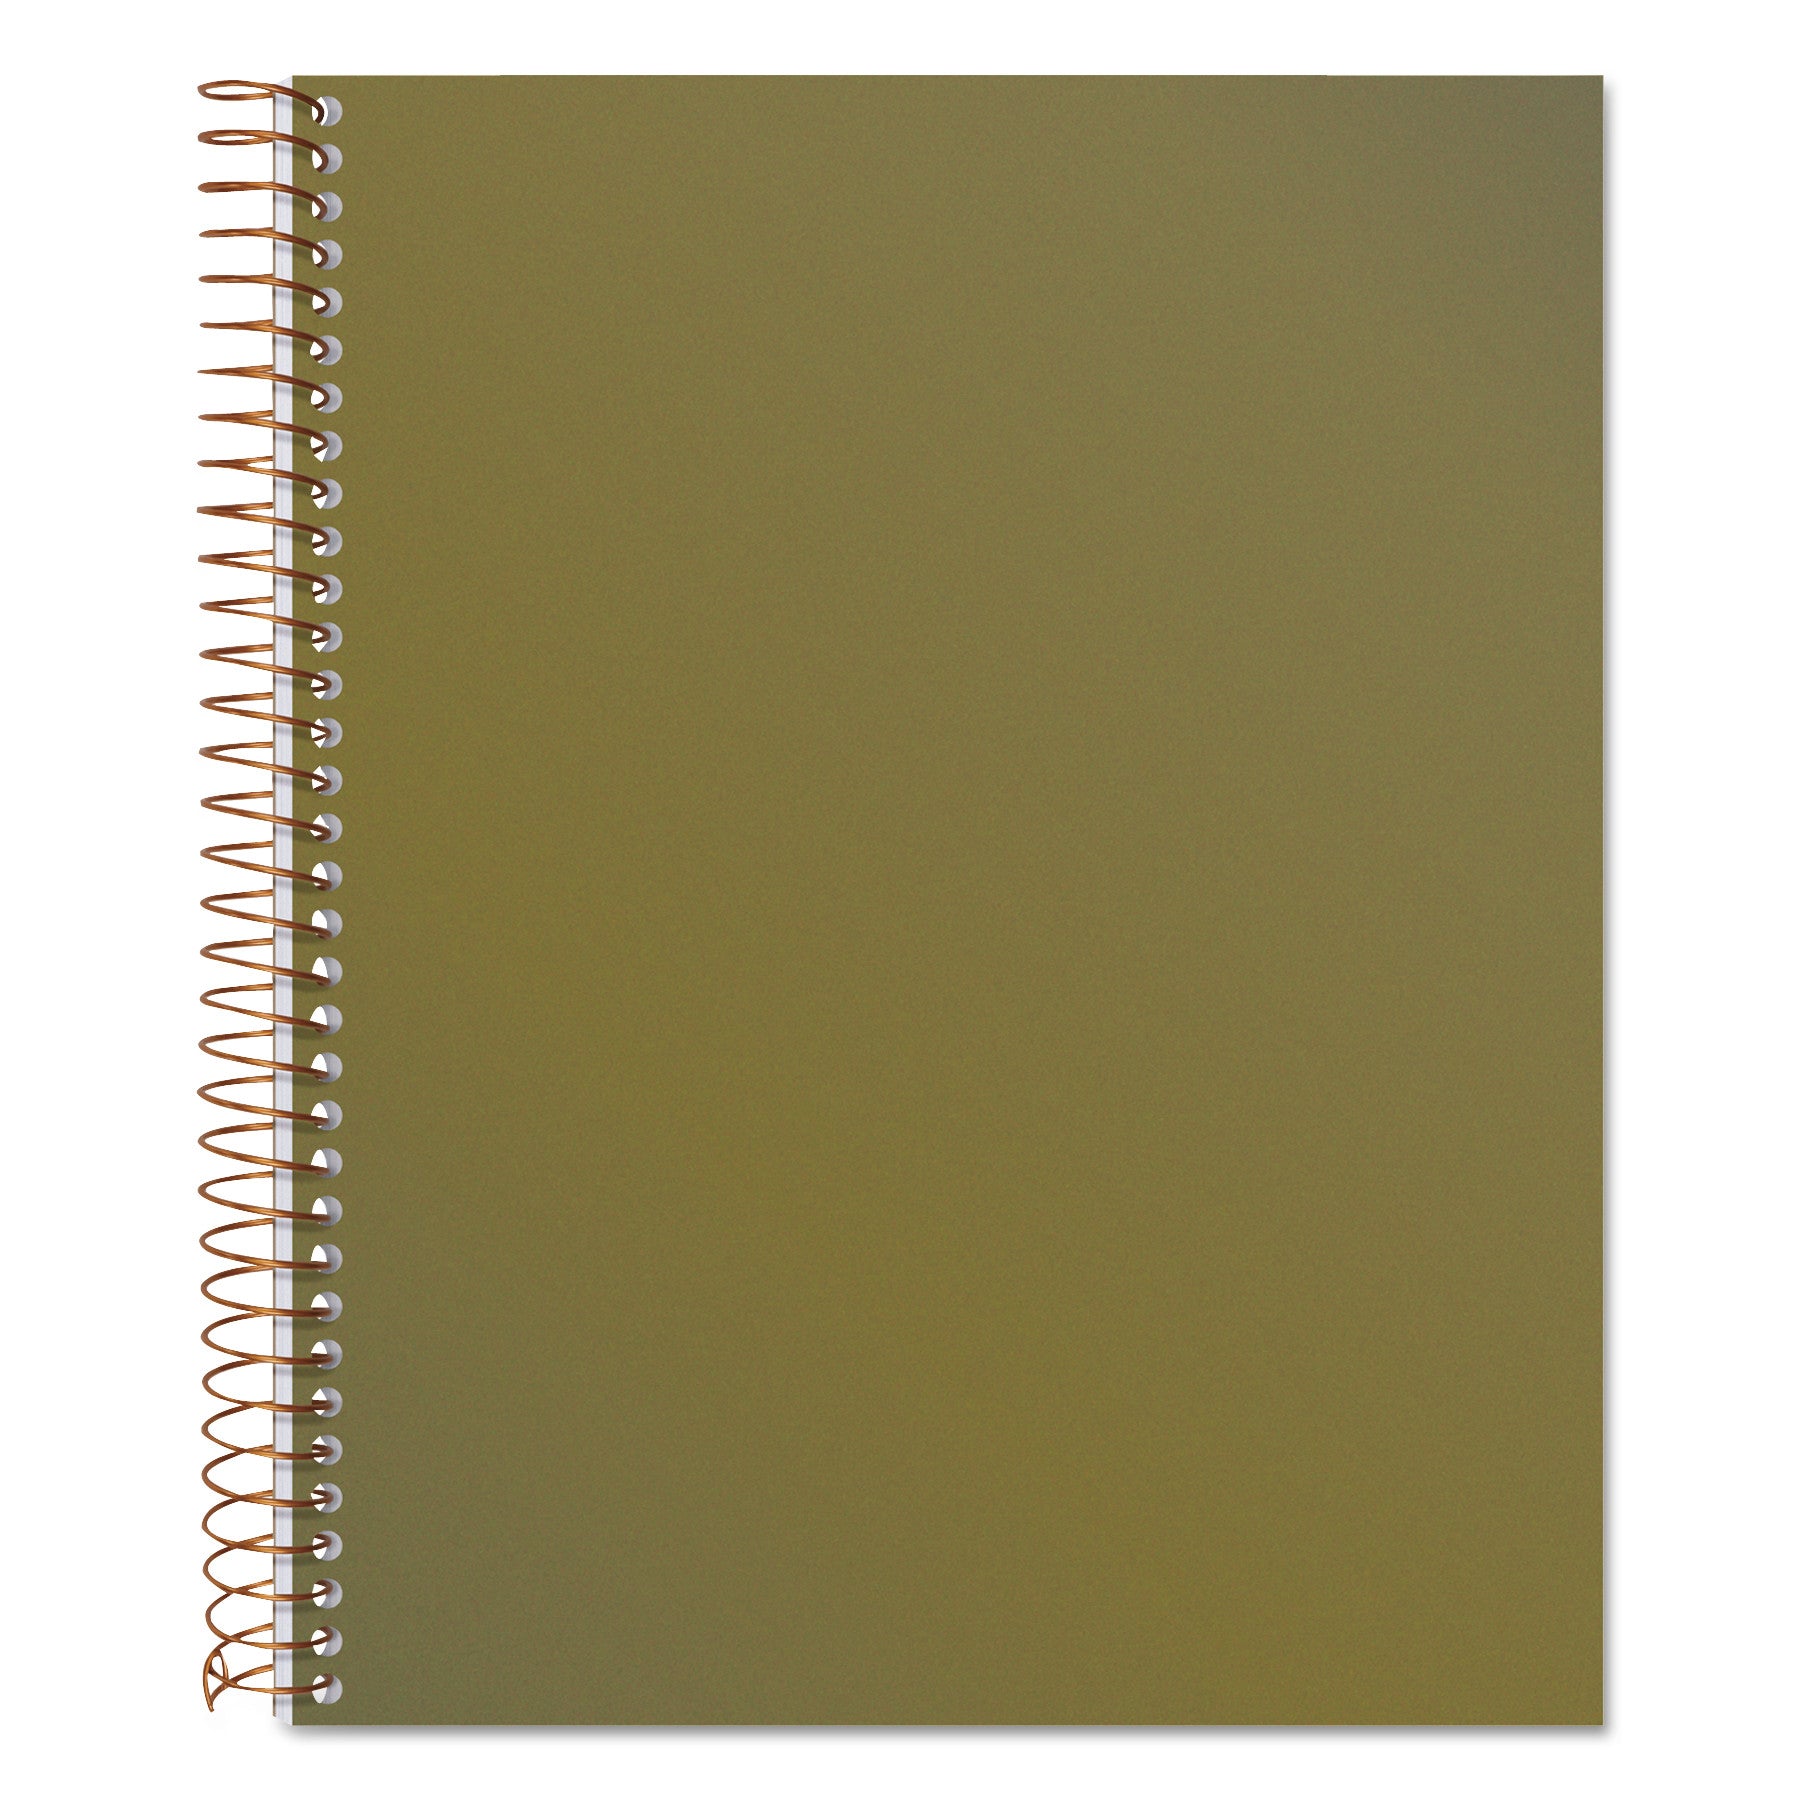 Docket Gold Project Planner, 1-Subject, Project-Management Format with Narrow Rule, Bronze Cover, (70) 8.5 x 6.75 Sheets - 